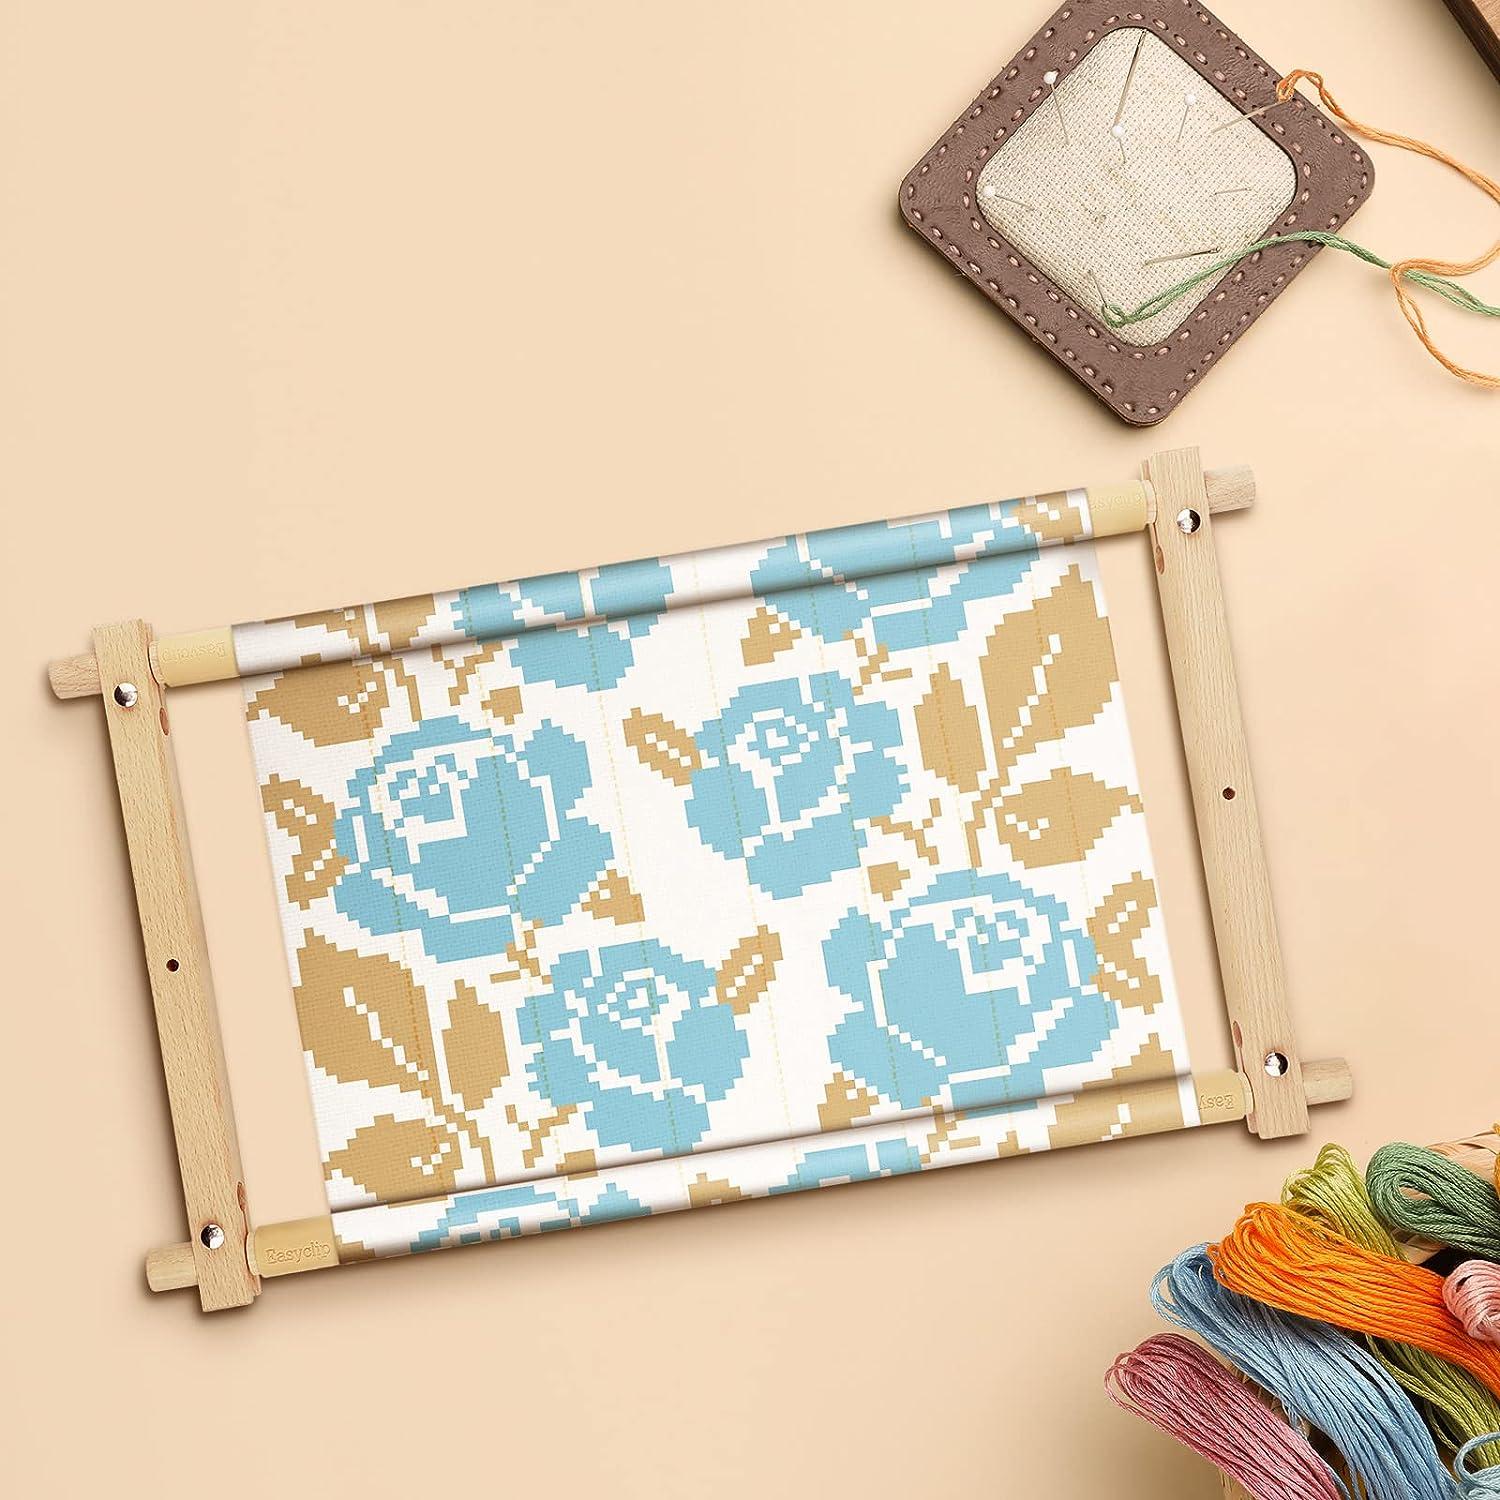 Needlework Scroll Frame by Homecrafters in Natural | 9 x 24 | Michaels